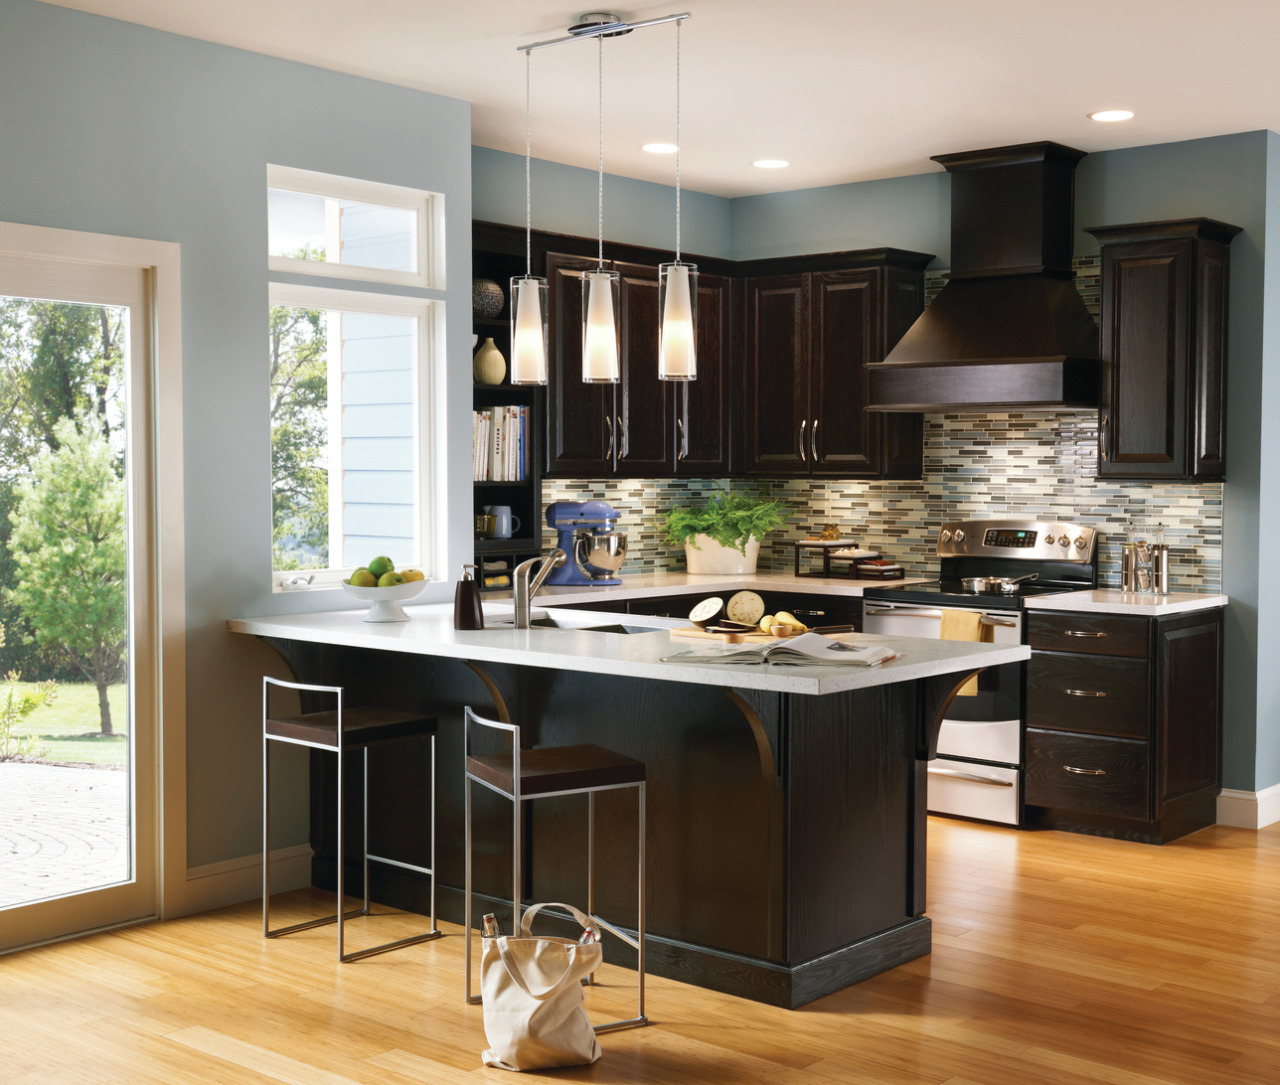 Design Meet Style A Contrasting Kitchen Pairs Espresso Cabinetry